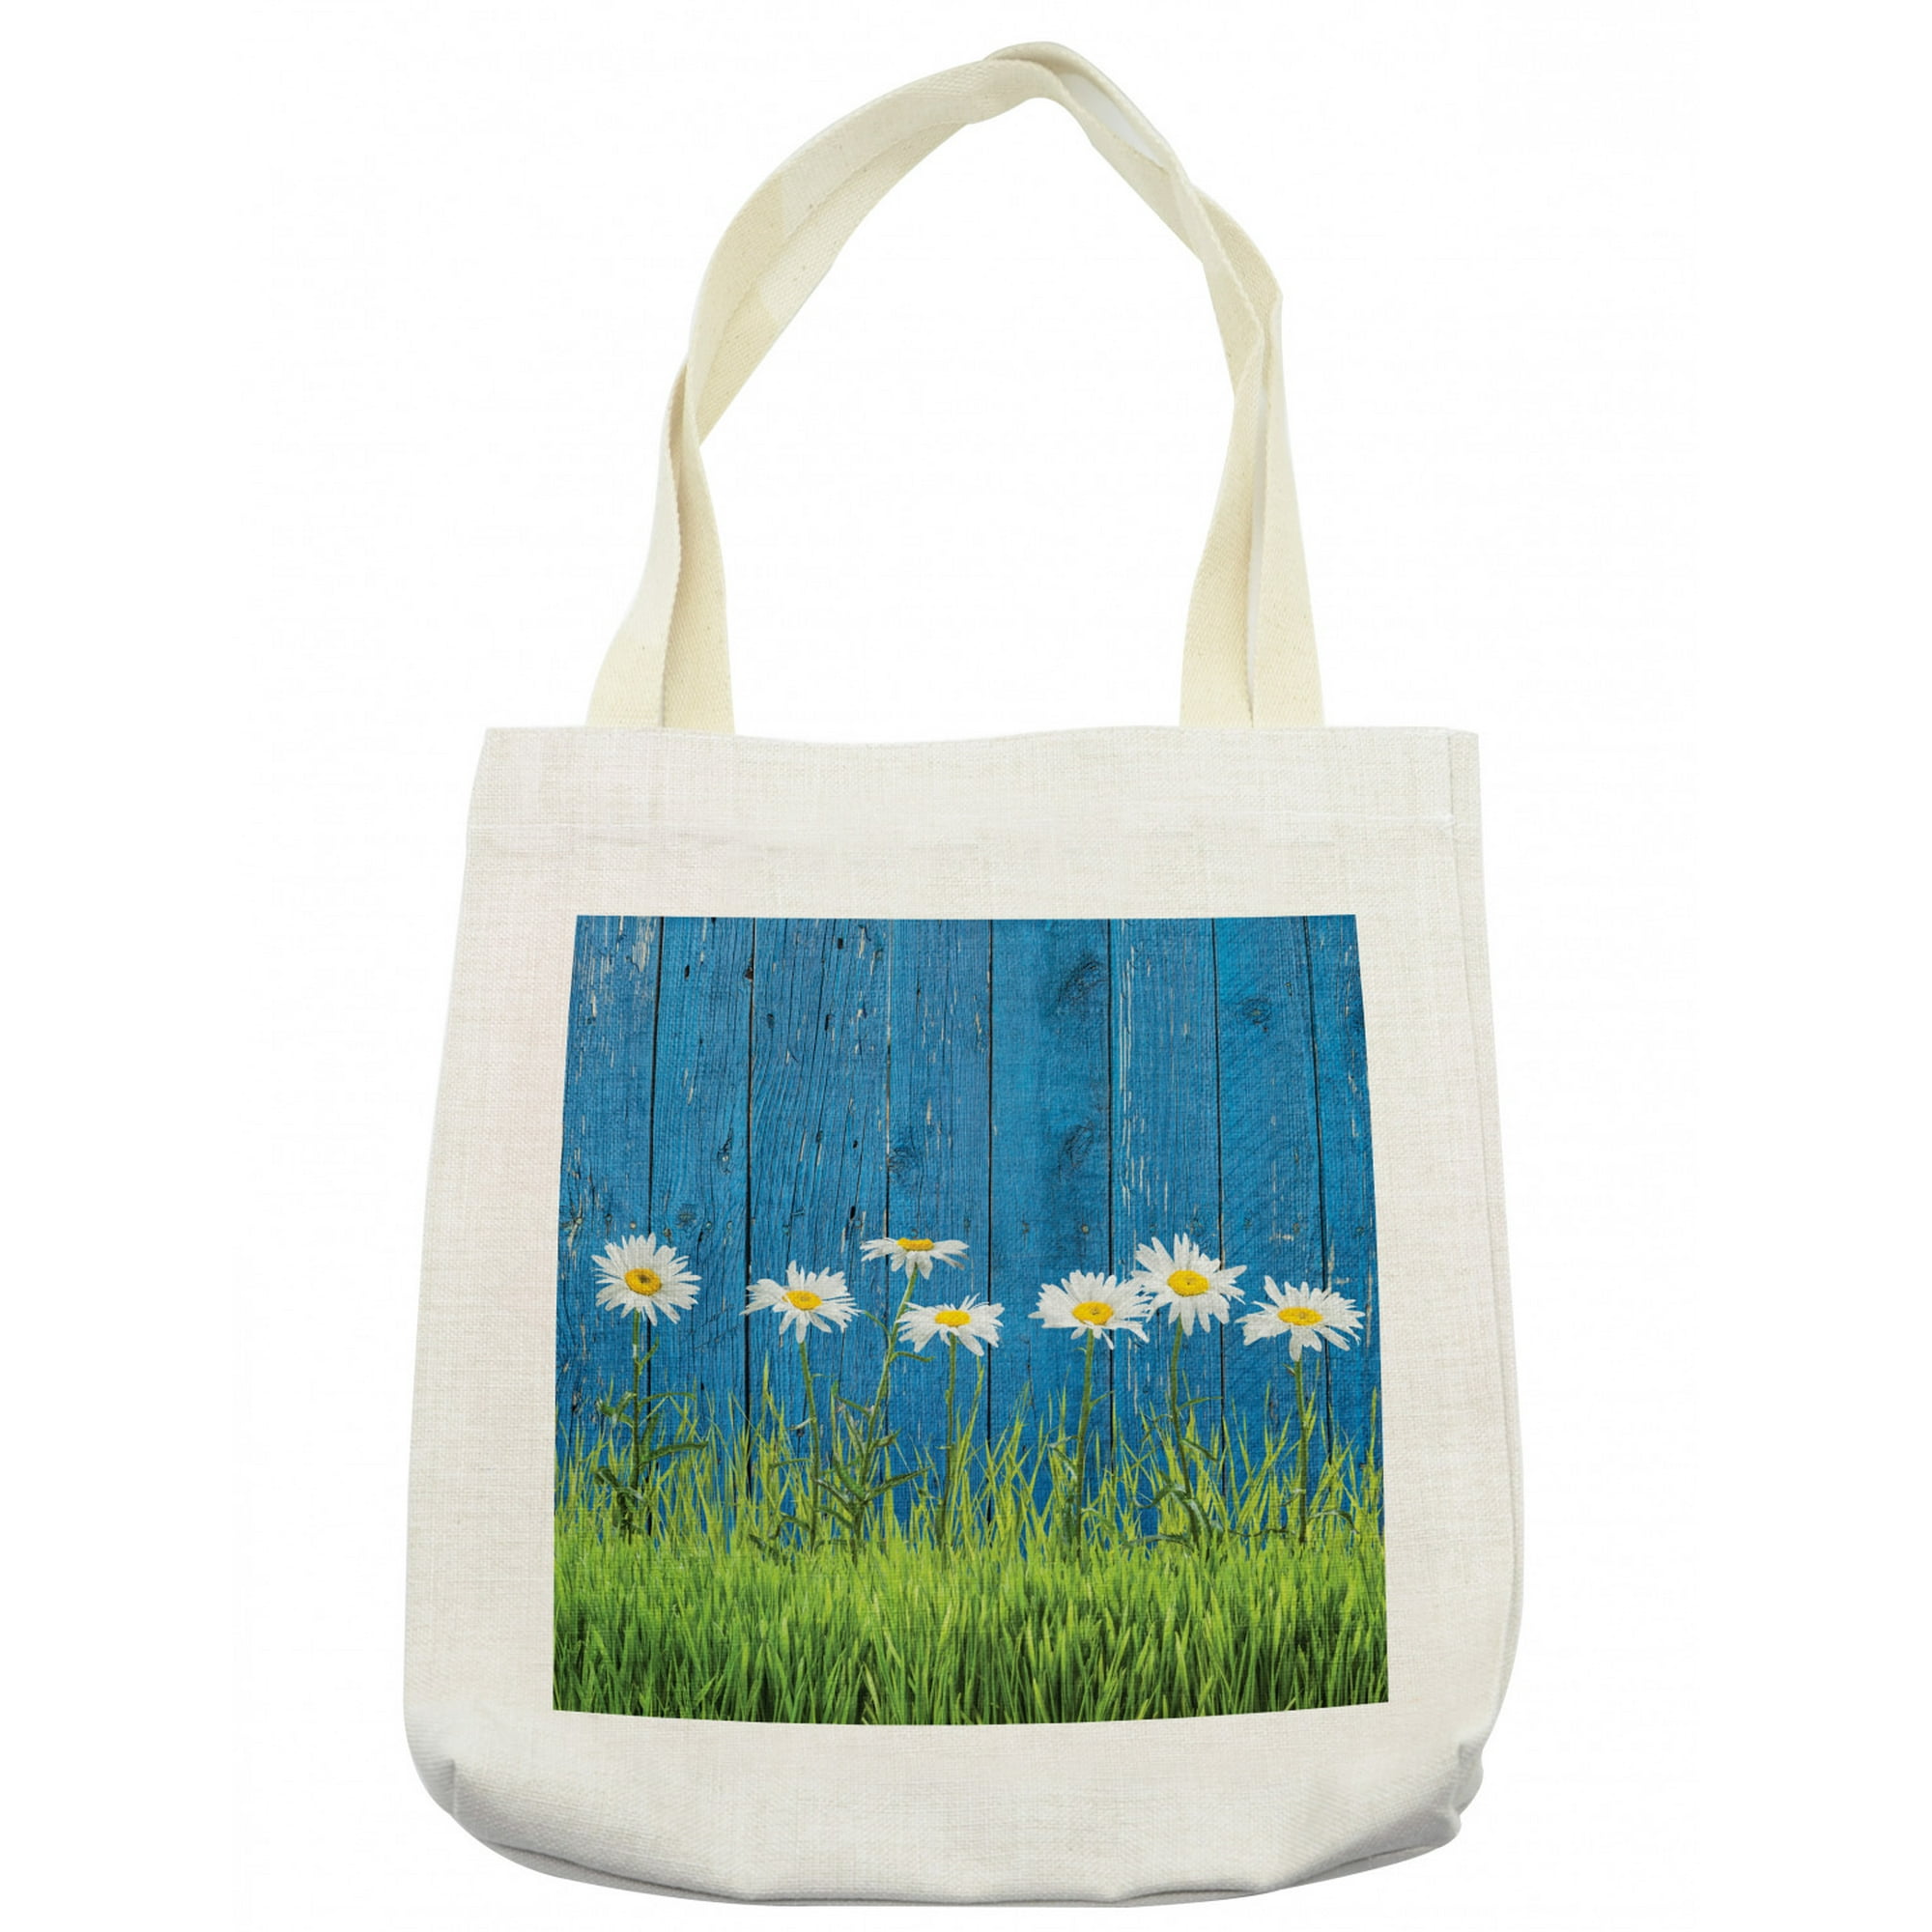 Flower Tote Bag, Fresh Springtime Grass and Daisy on Fence Summer Simple Vintage Style Print, Cloth Linen Reusable Bag for Shopping Books Beach and